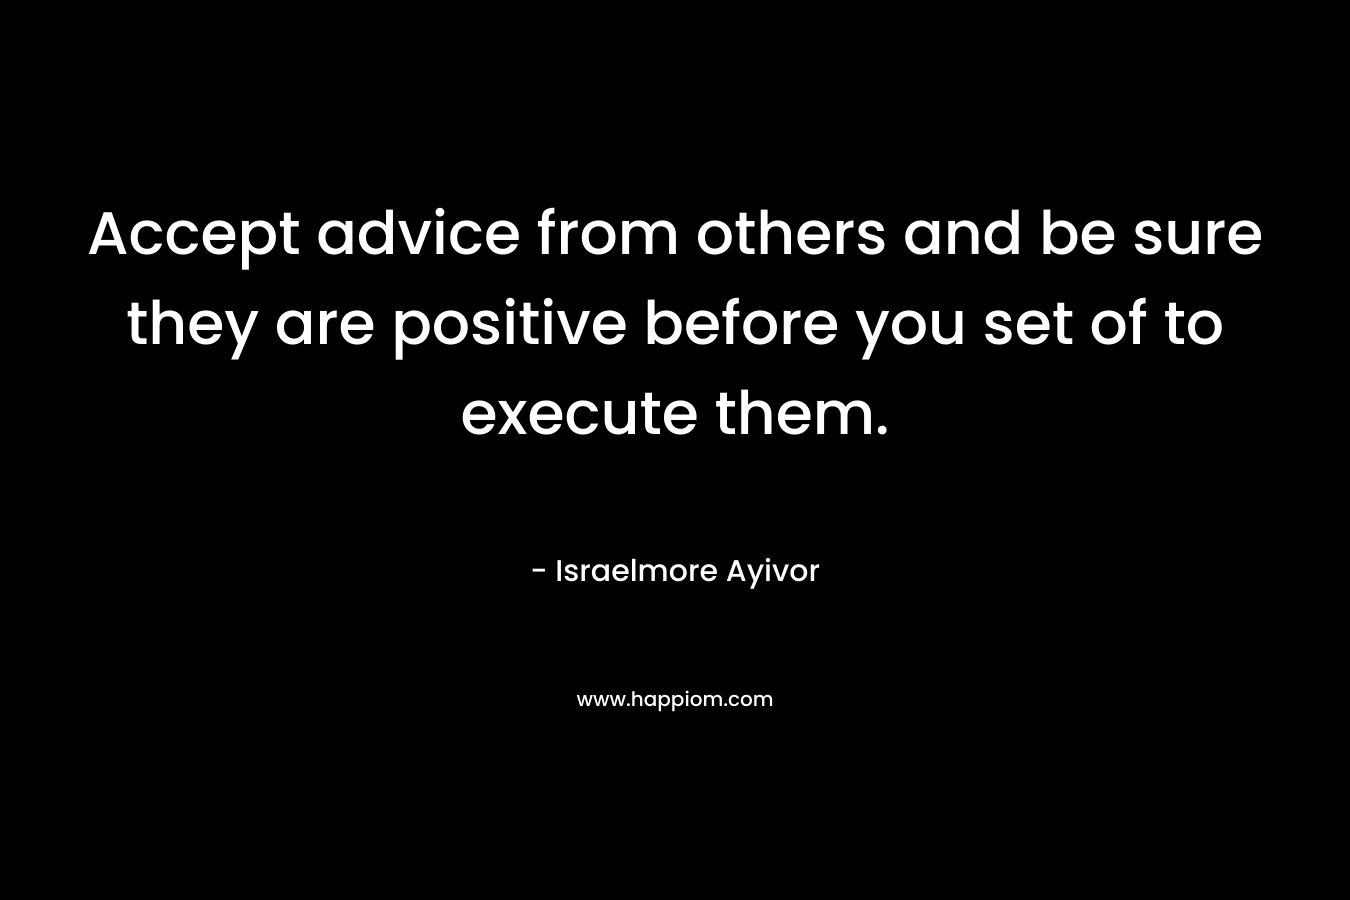 Accept advice from others and be sure they are positive before you set of to execute them.